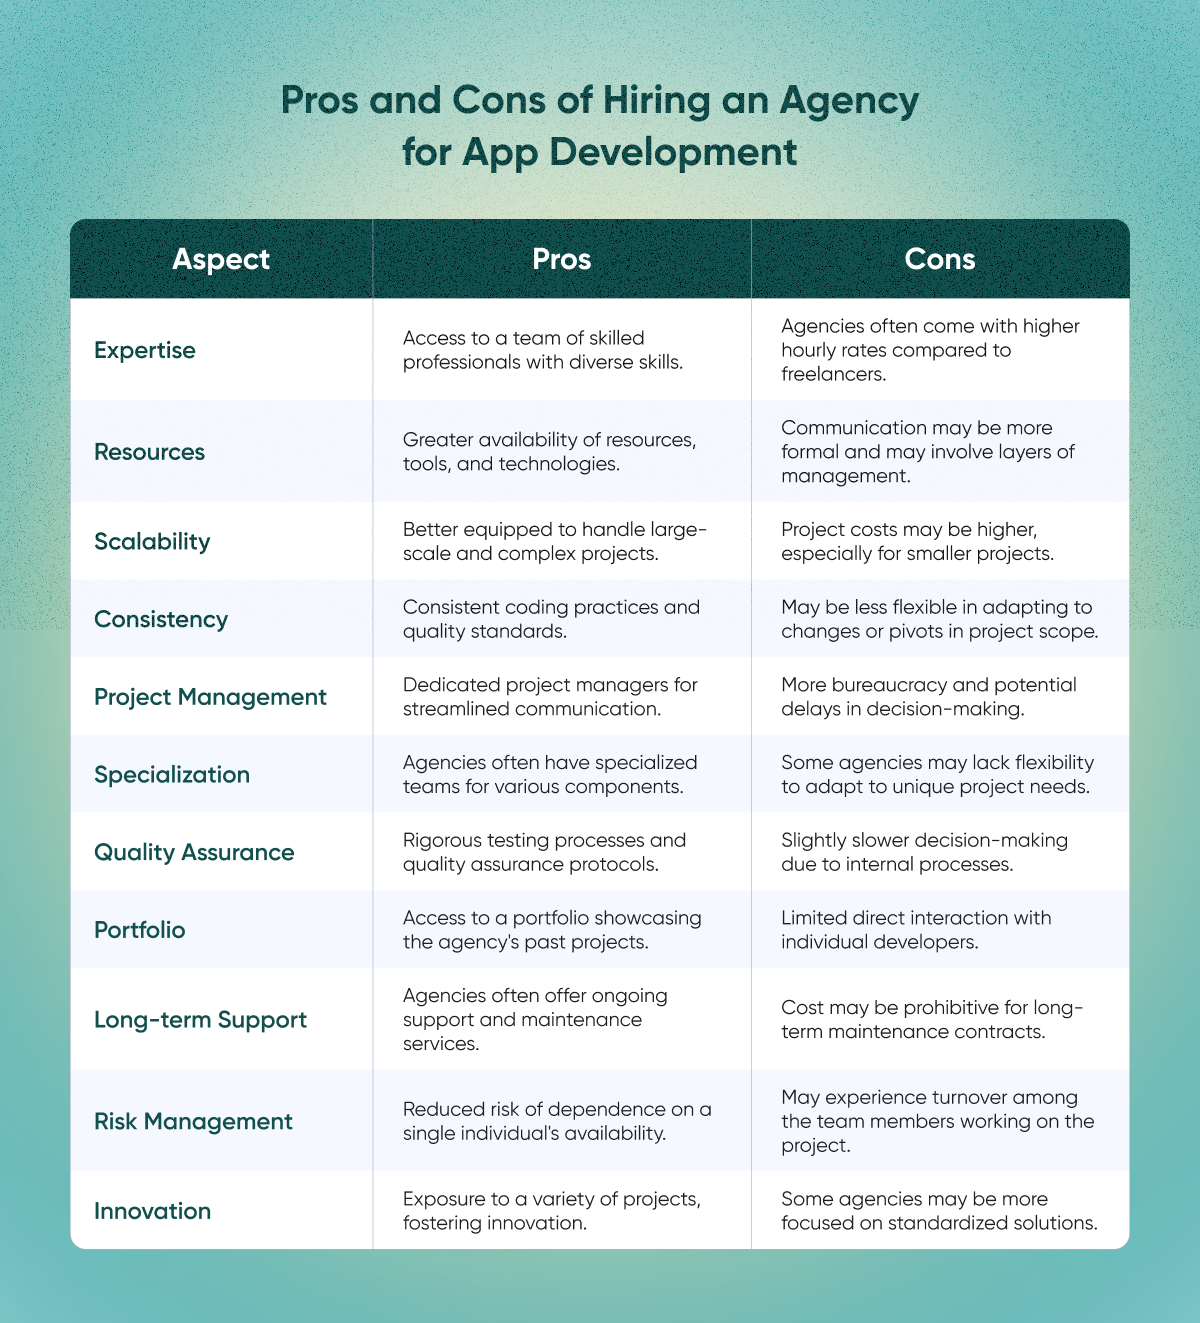 Pros and Cons of Hiring an Agency for App Development